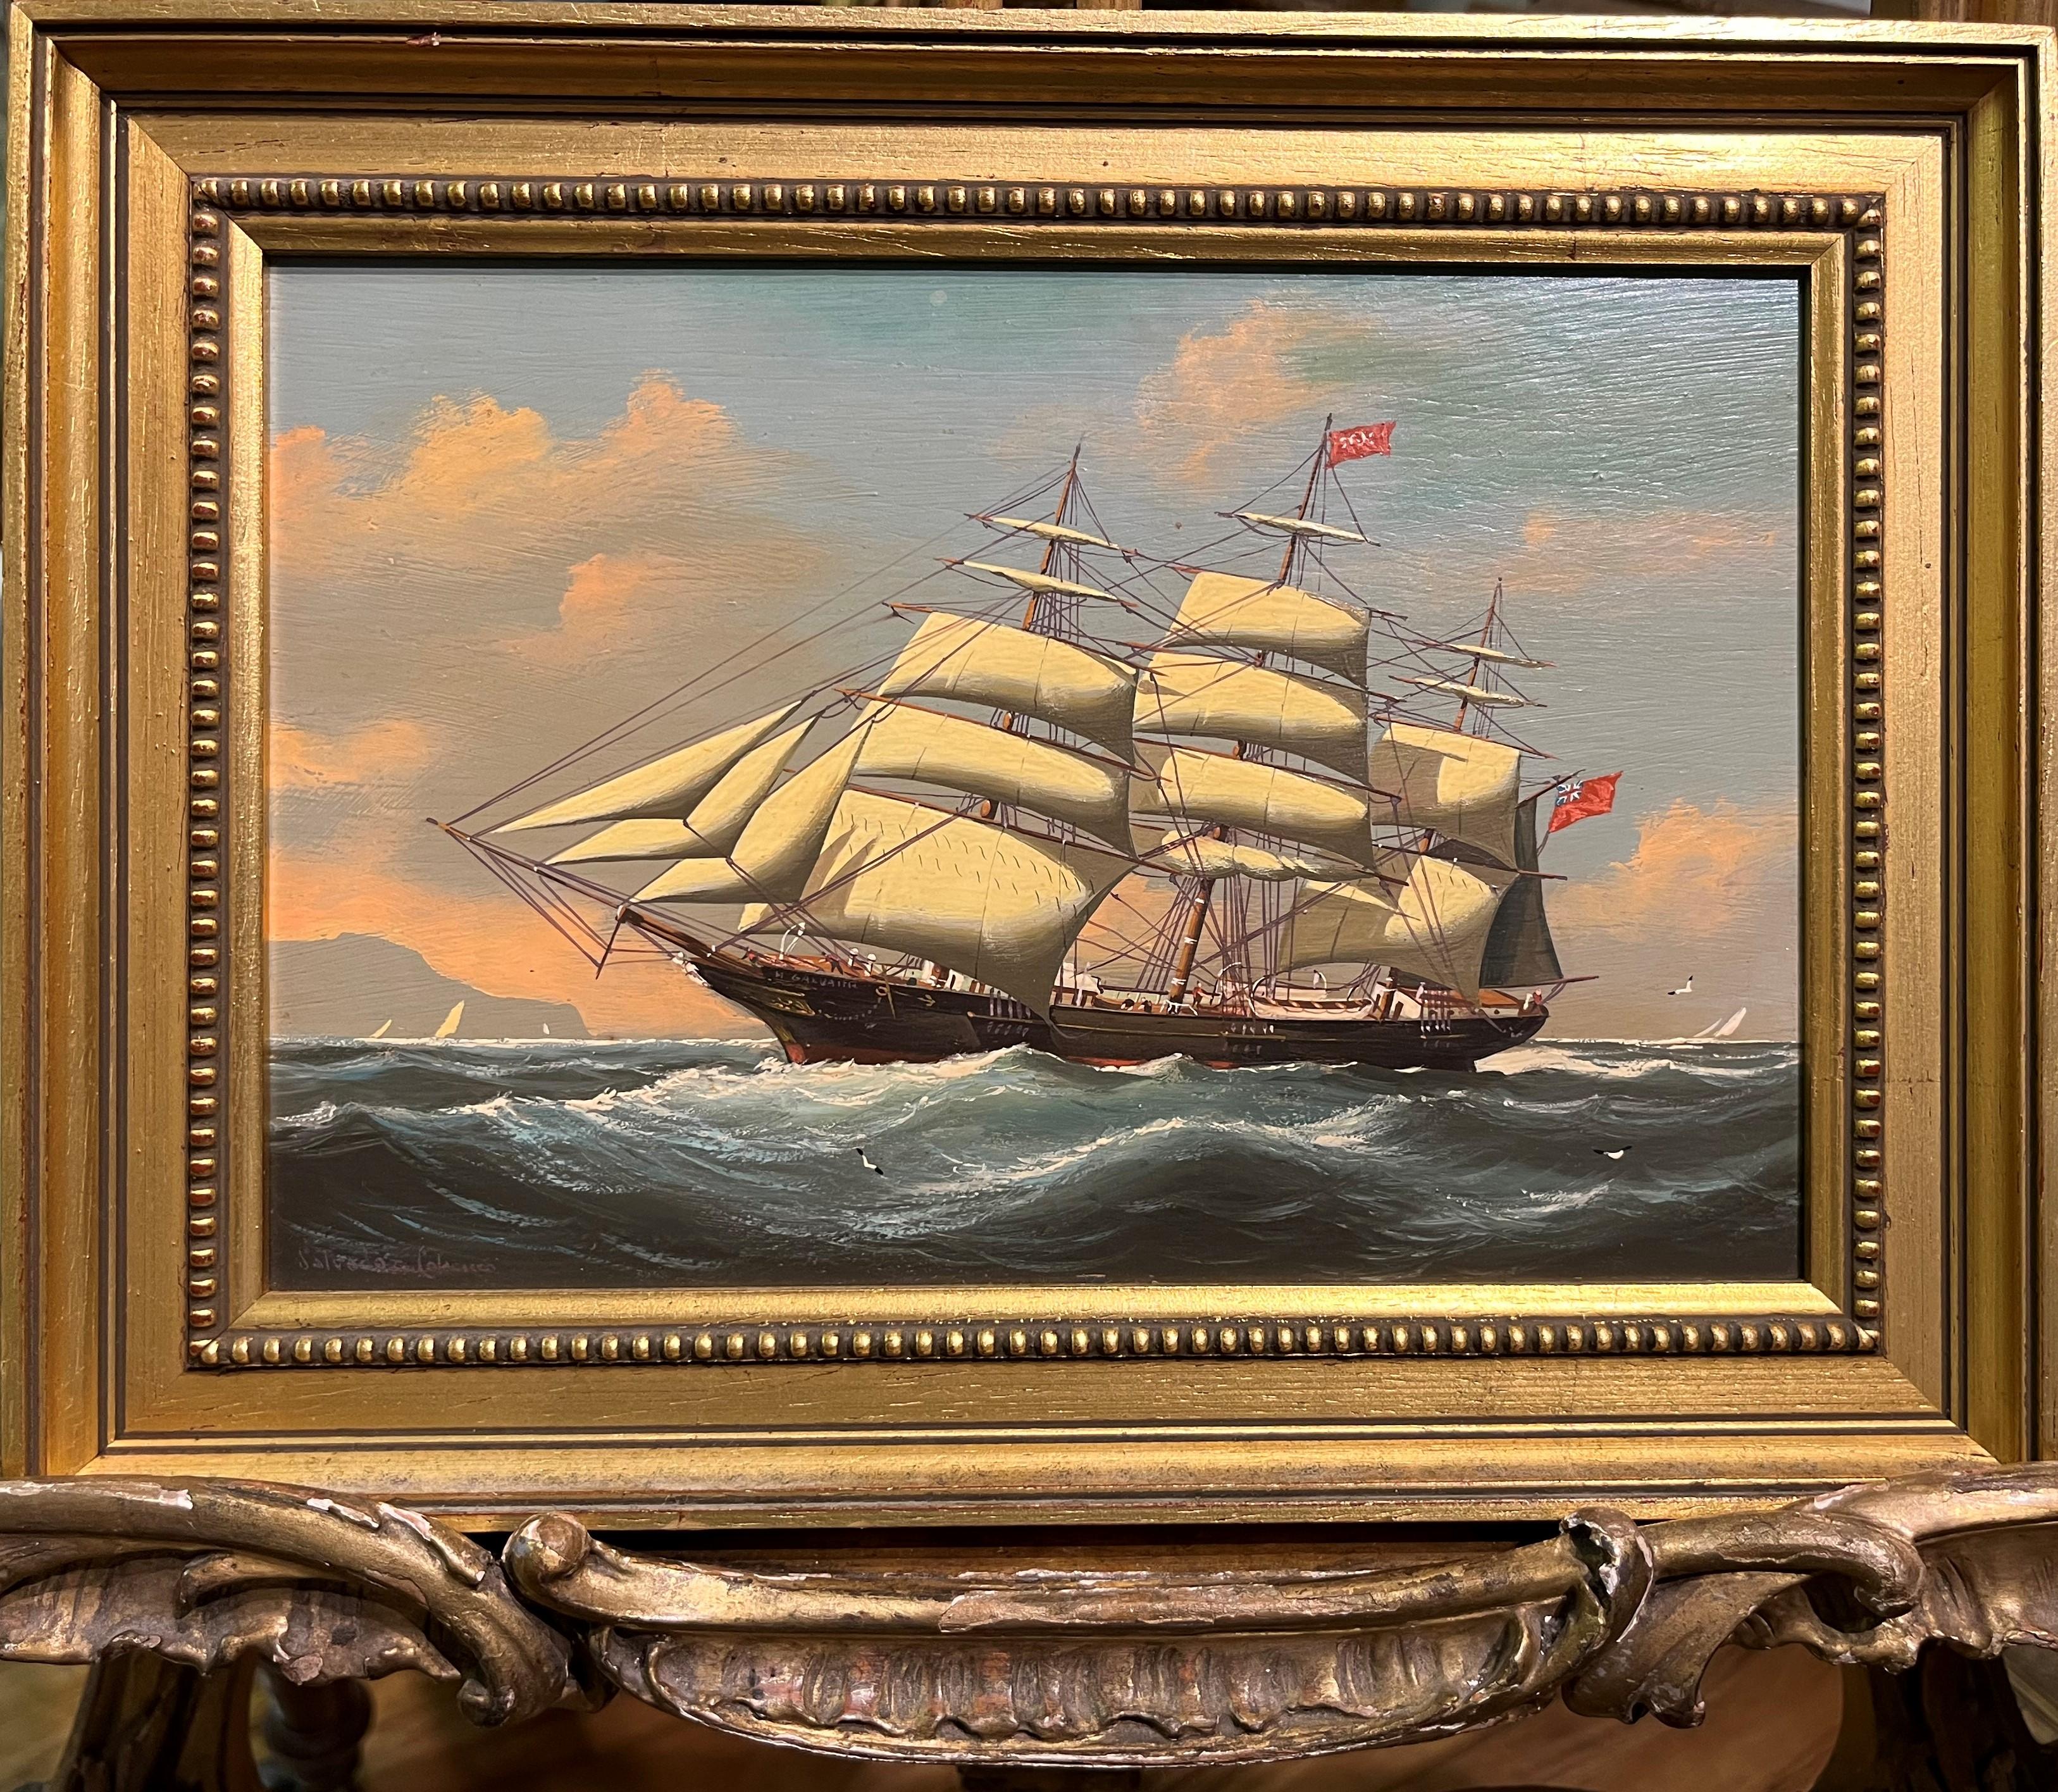 OIL PAINTING Small by SALVATORE COLACICCO (NAVY ADMIRALTY 20th CENTURY PIECE  - Art by Salvatore Colacicco